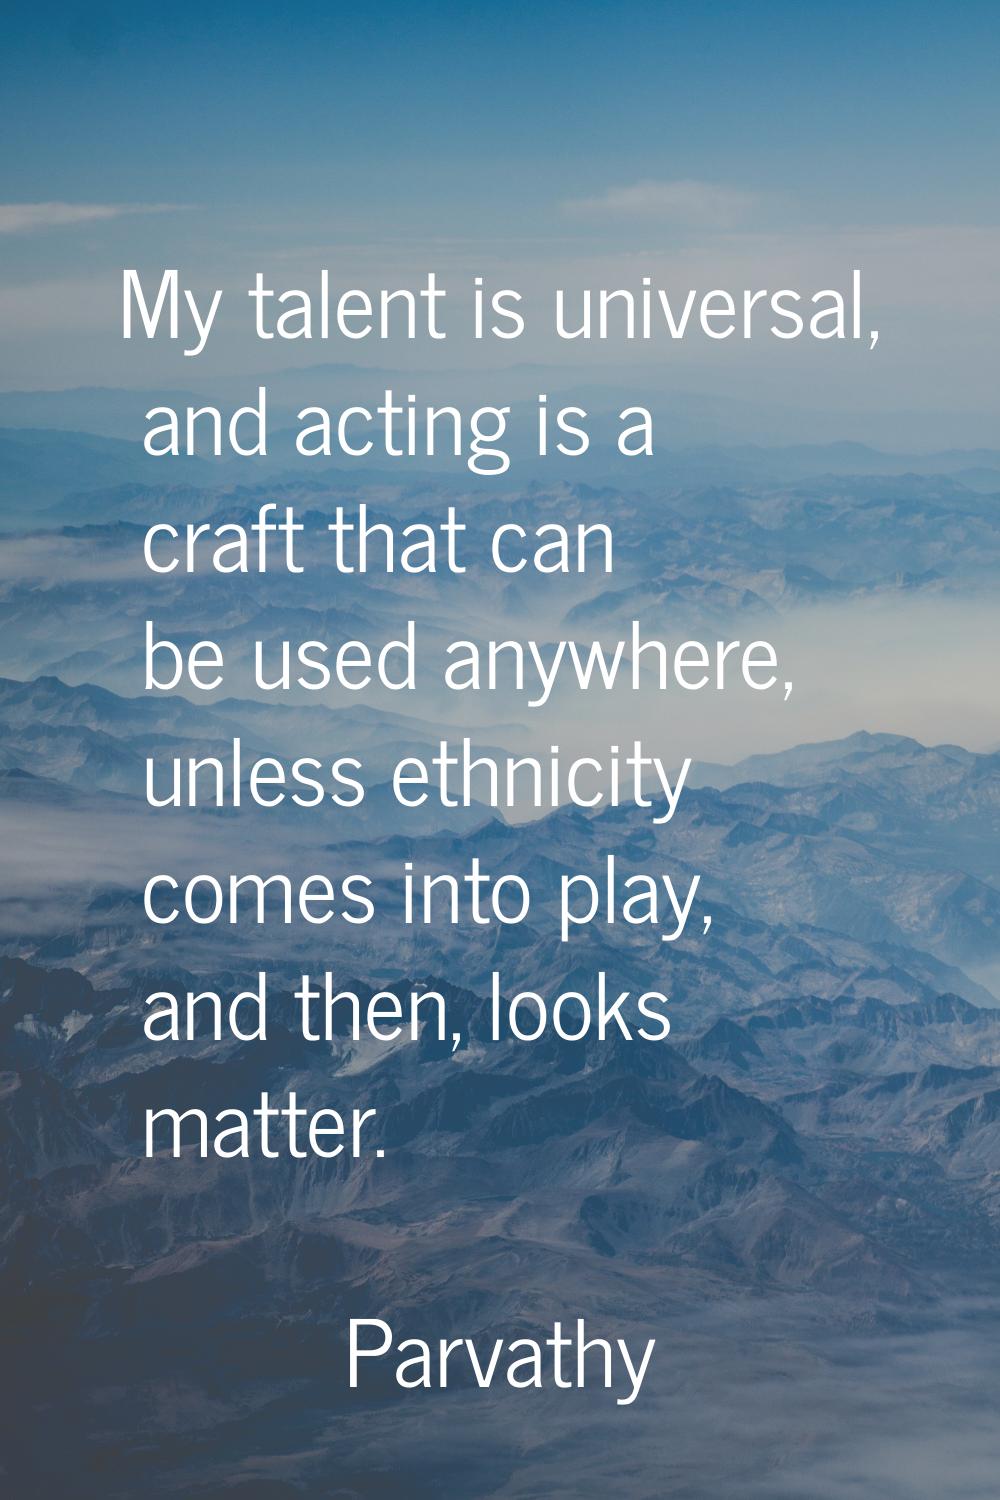 My talent is universal, and acting is a craft that can be used anywhere, unless ethnicity comes int